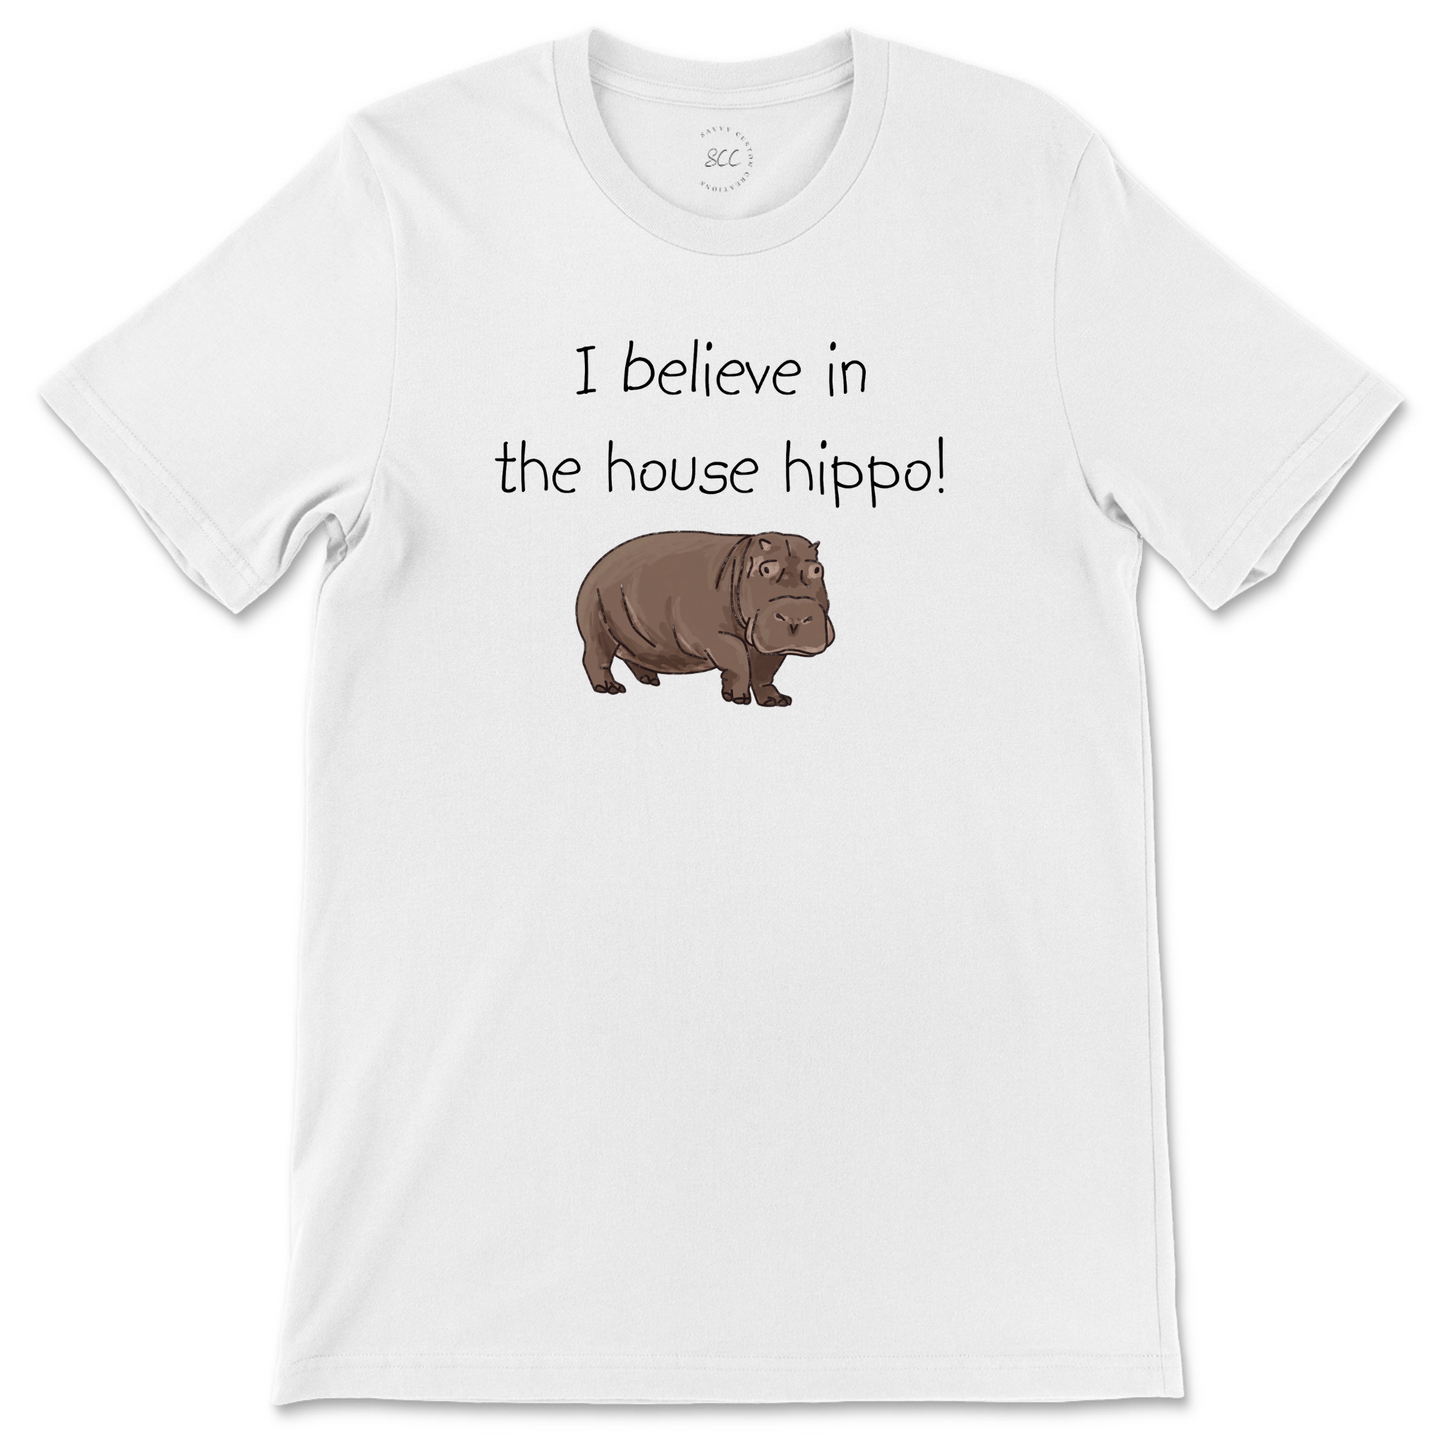 I BELIEVE IN THE HOUSE HIPPO! - Unisex Crewneck T-Shirt